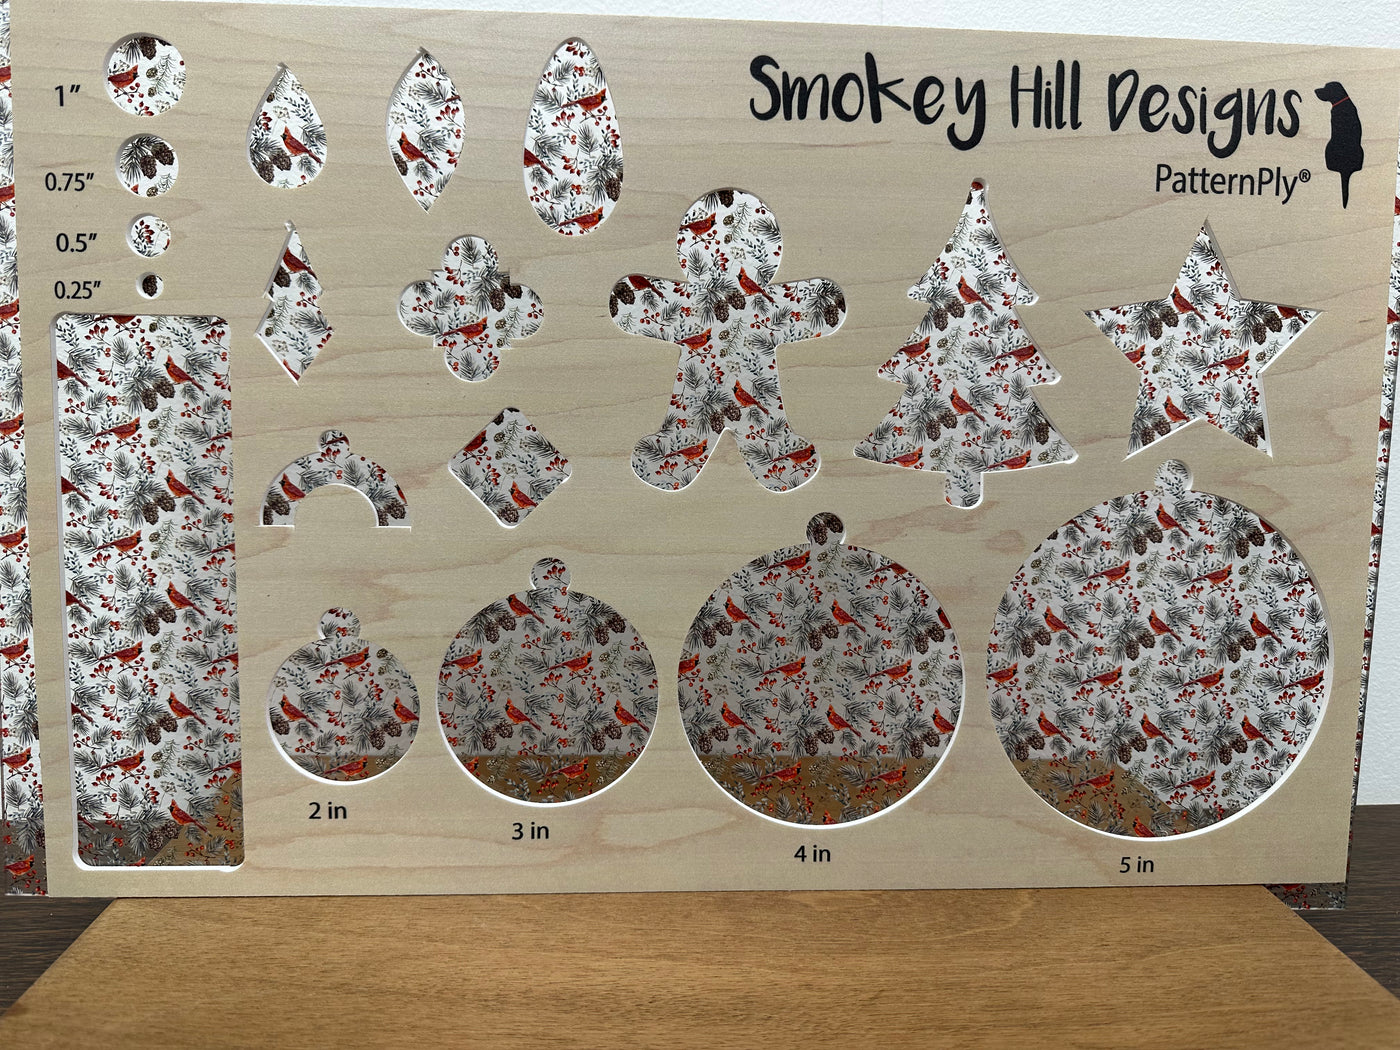 PatternPly® Scattered Cardinals and Pinecones